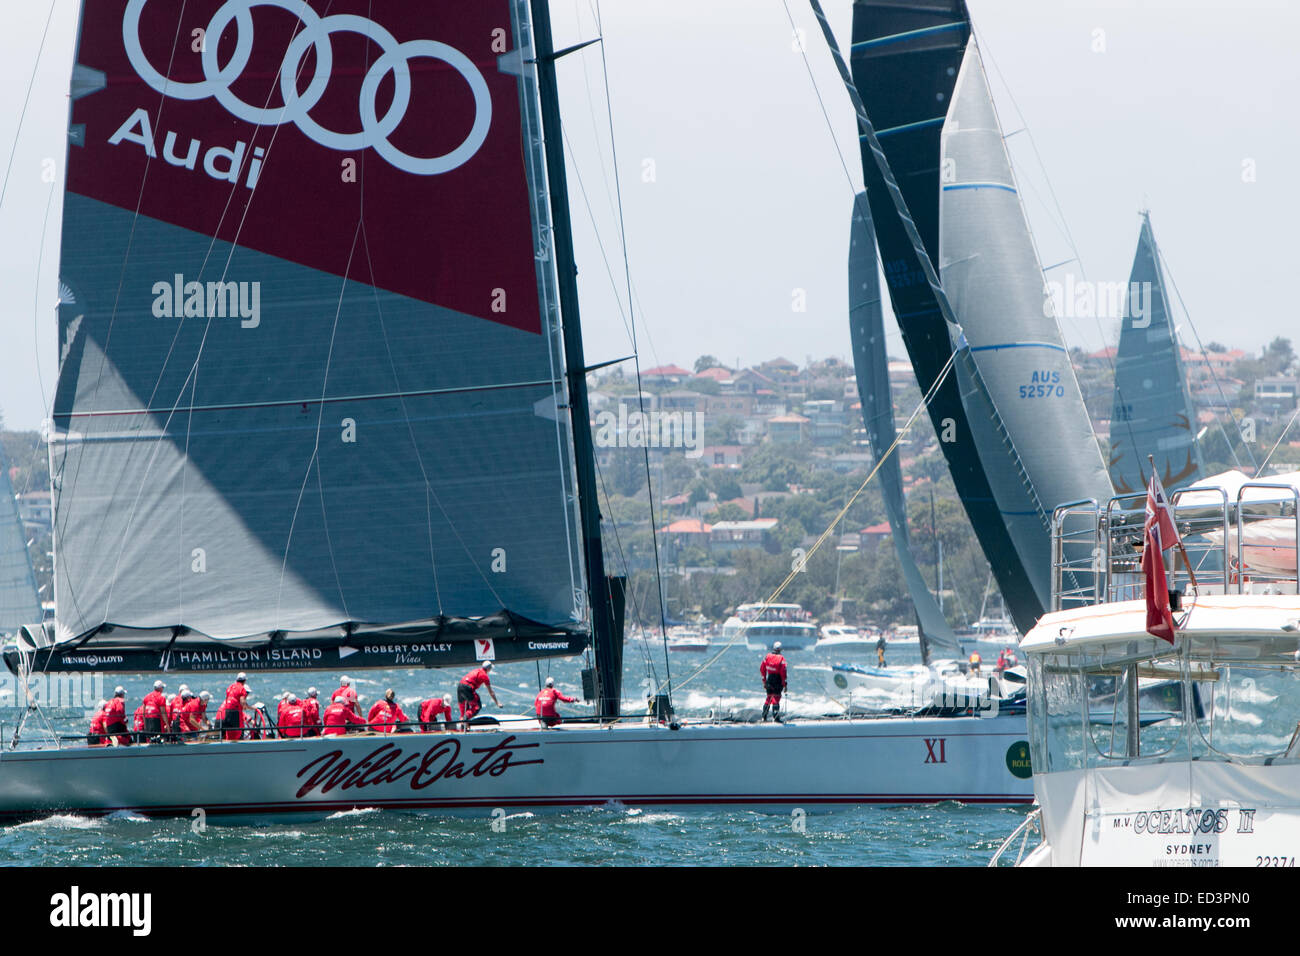 Sydney, Australia. 26th December, 2014.  Start of 70th Sydney to Hobart Yacht Race in Sydney Harbour, Australia. One of the favouries Wild Oats X1 Credit:  martin berry/Alamy Live News Stock Photo